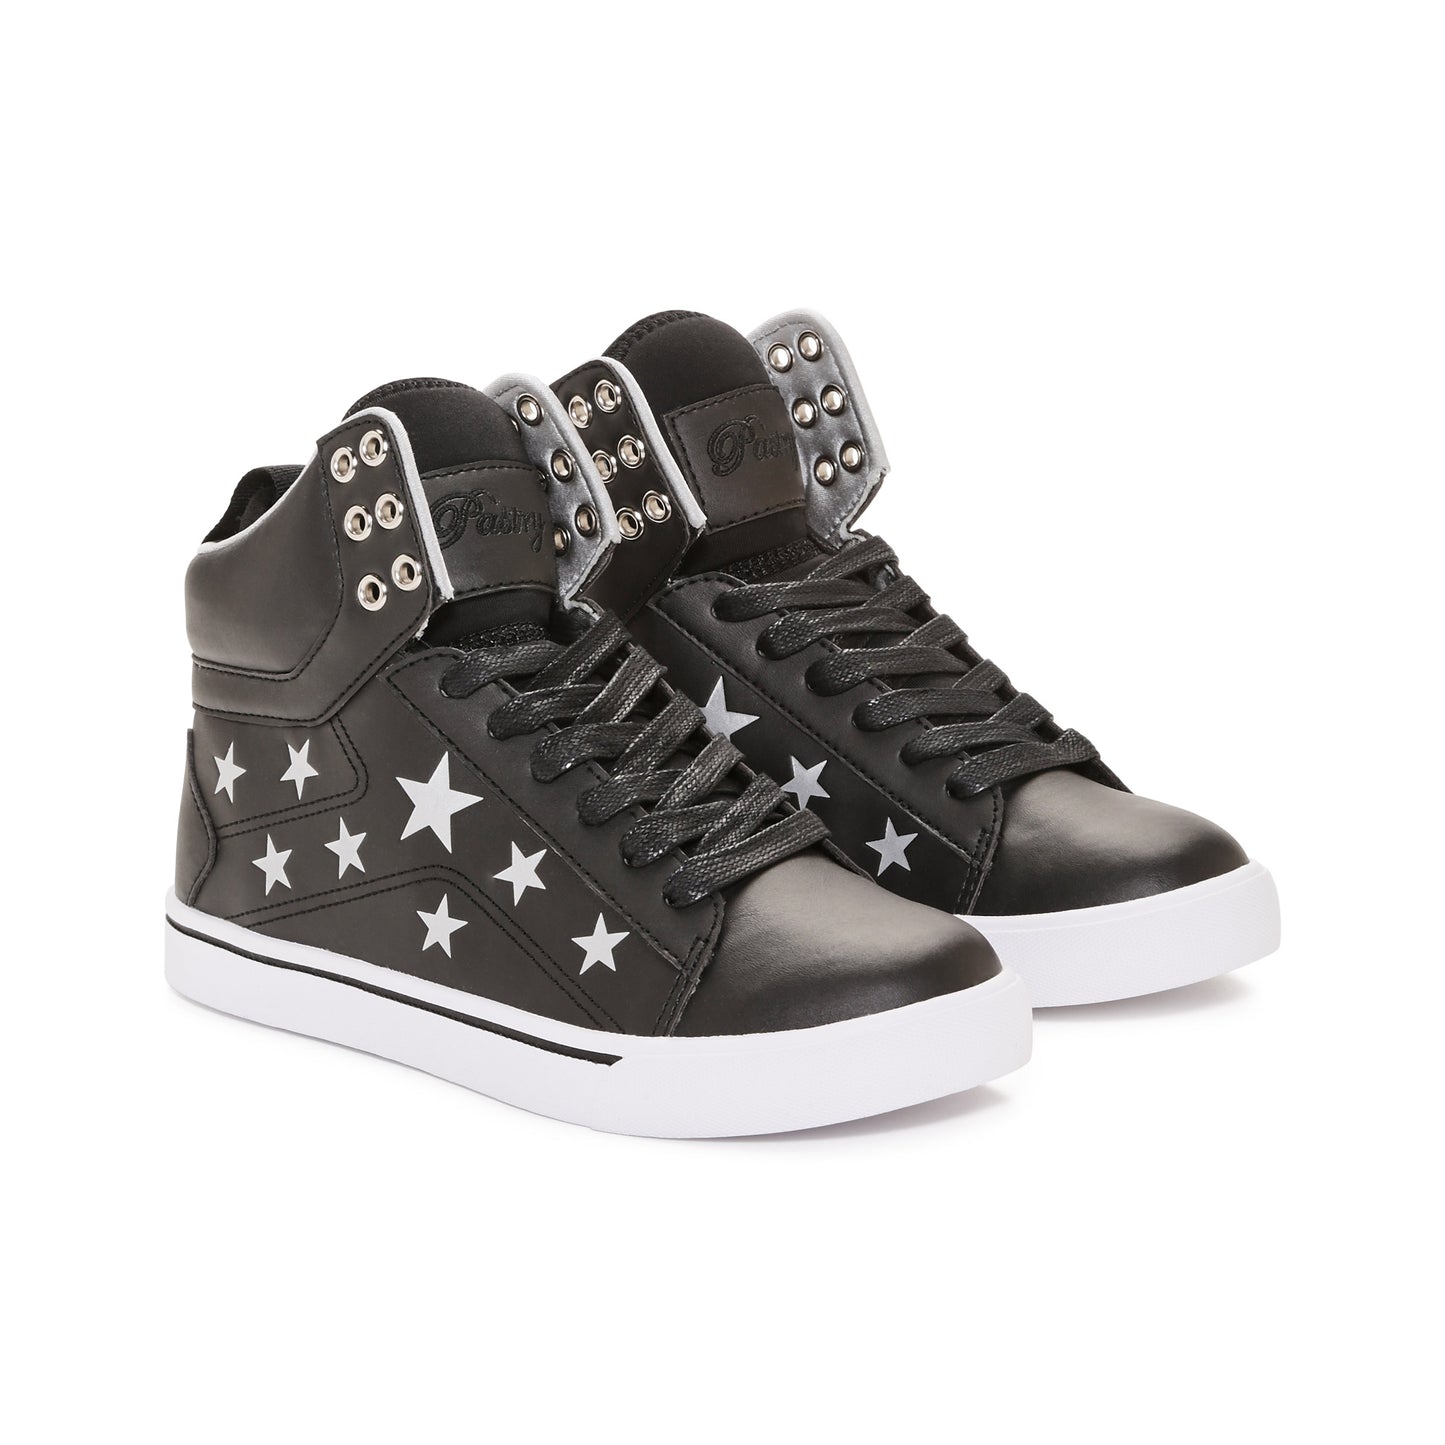 Pair of Pastry Pop Tart Star Youth Sneaker in Black/Silver in 3 quarter view